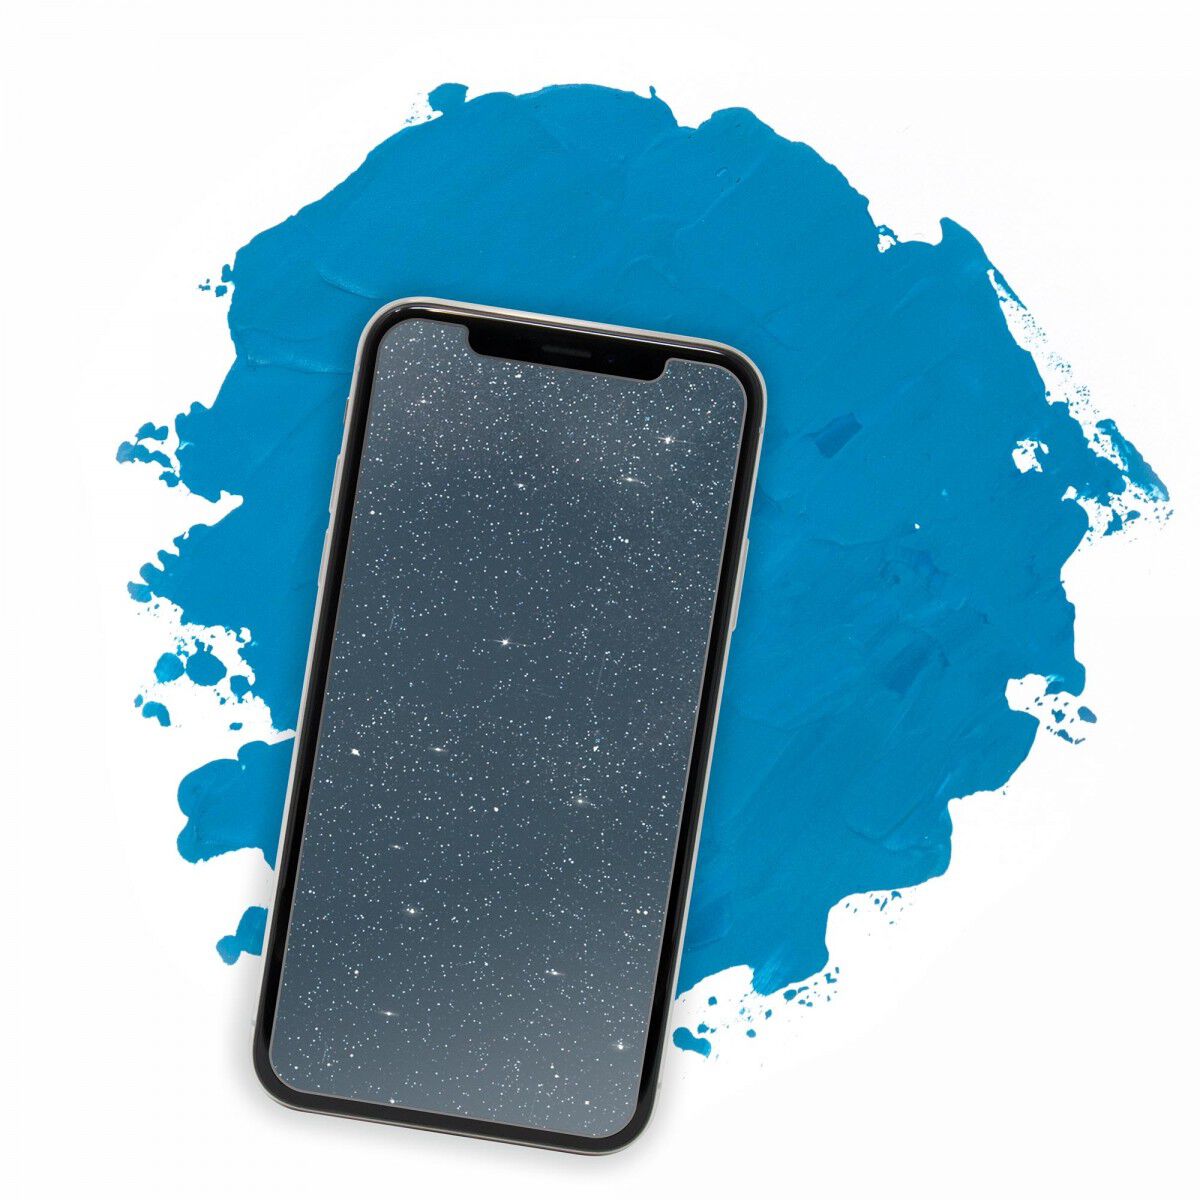 Showtime Glitter Glass (Blue) for Apple iPhone X